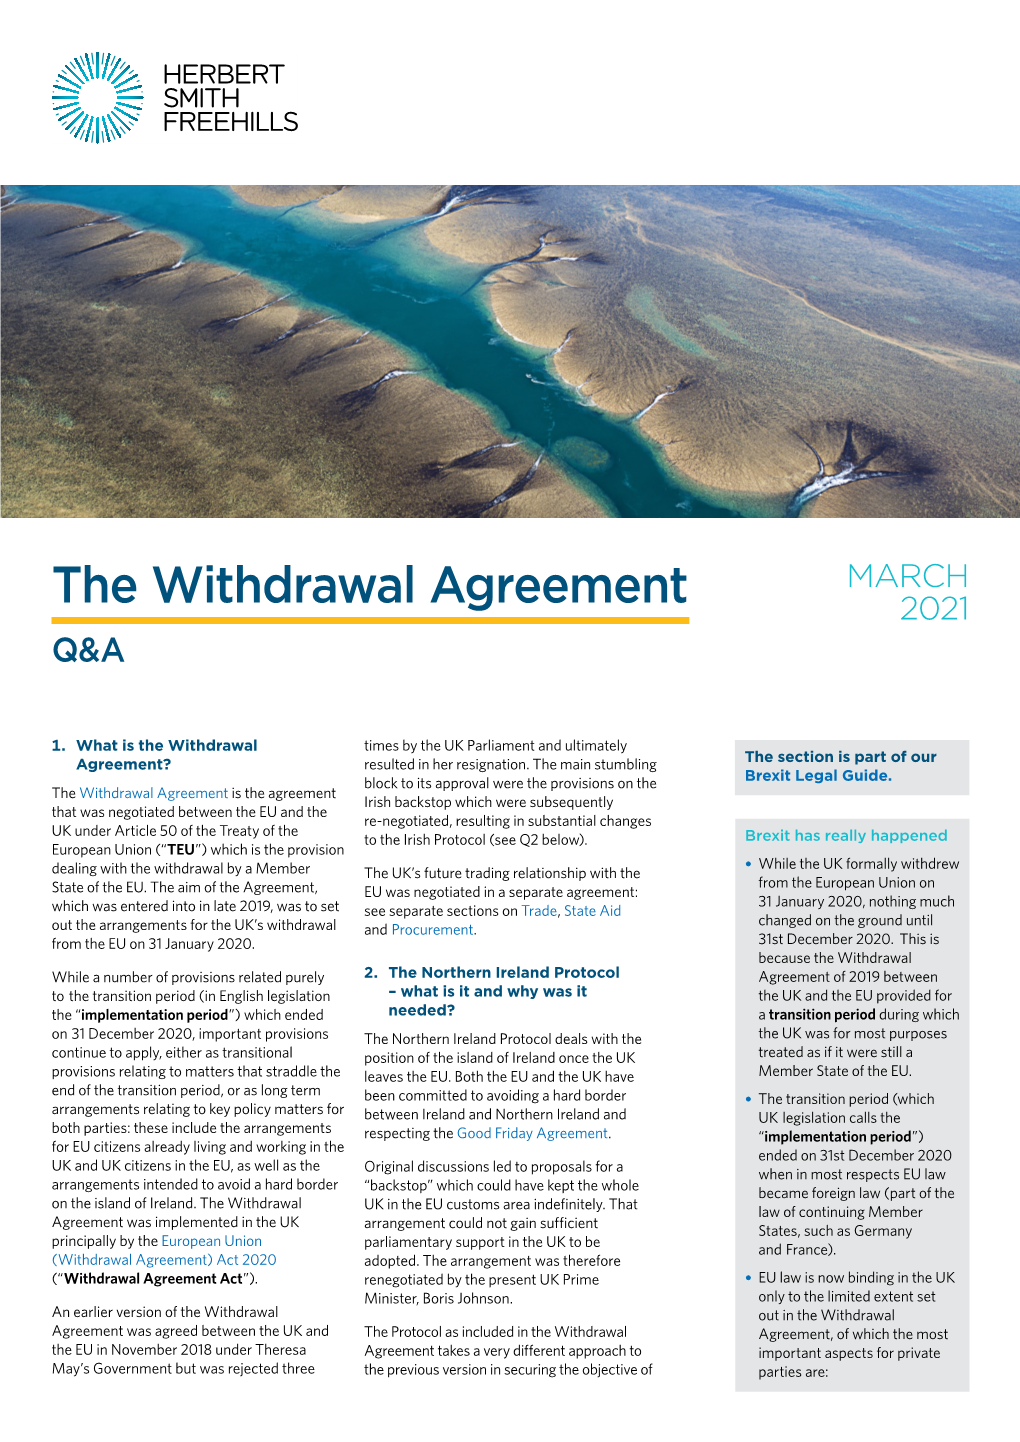 The Withdrawal Agreement Q&A